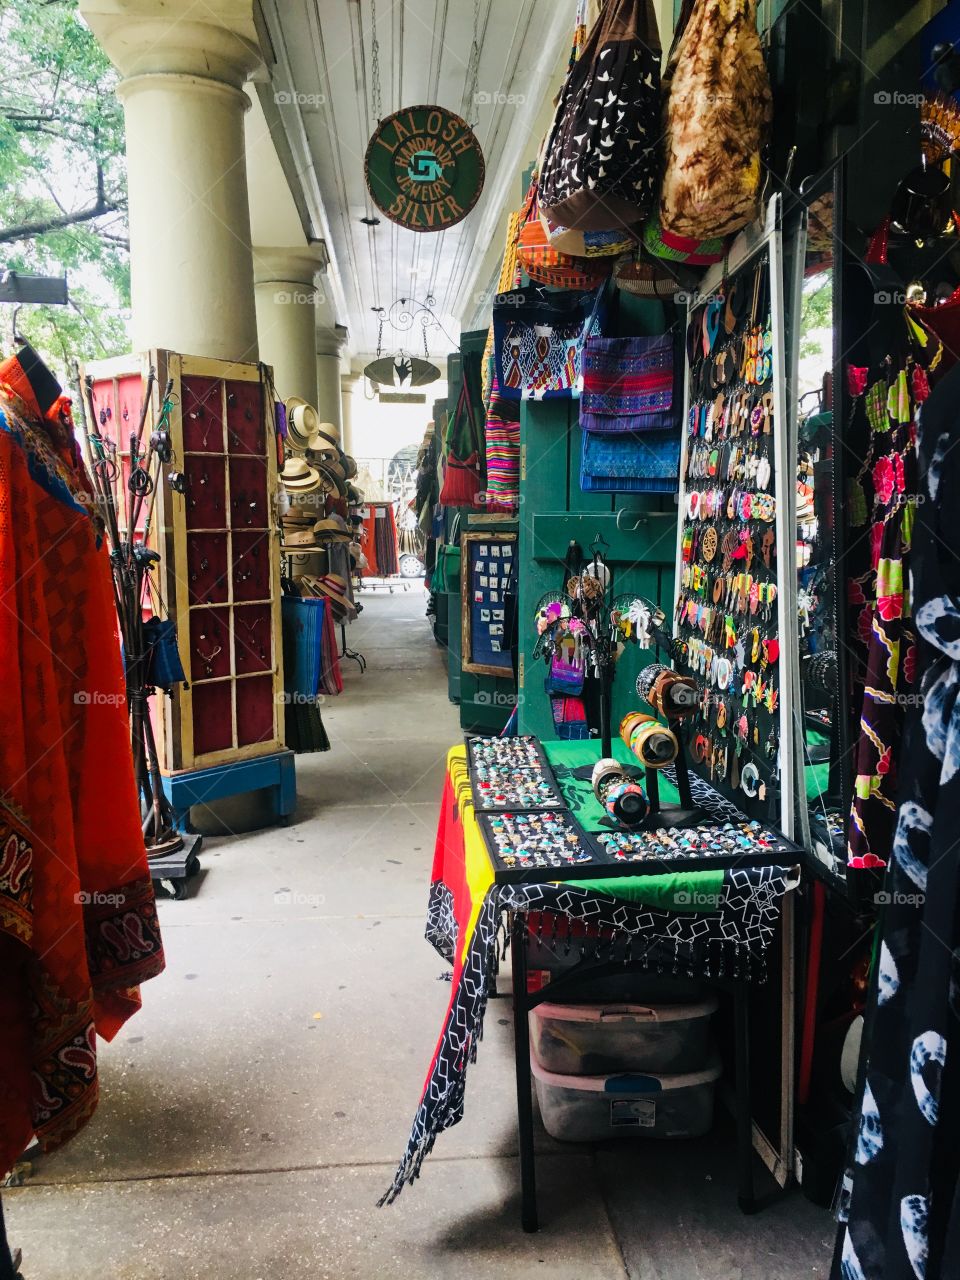 Market with merchandise in New Orleans, Louisiana, USA